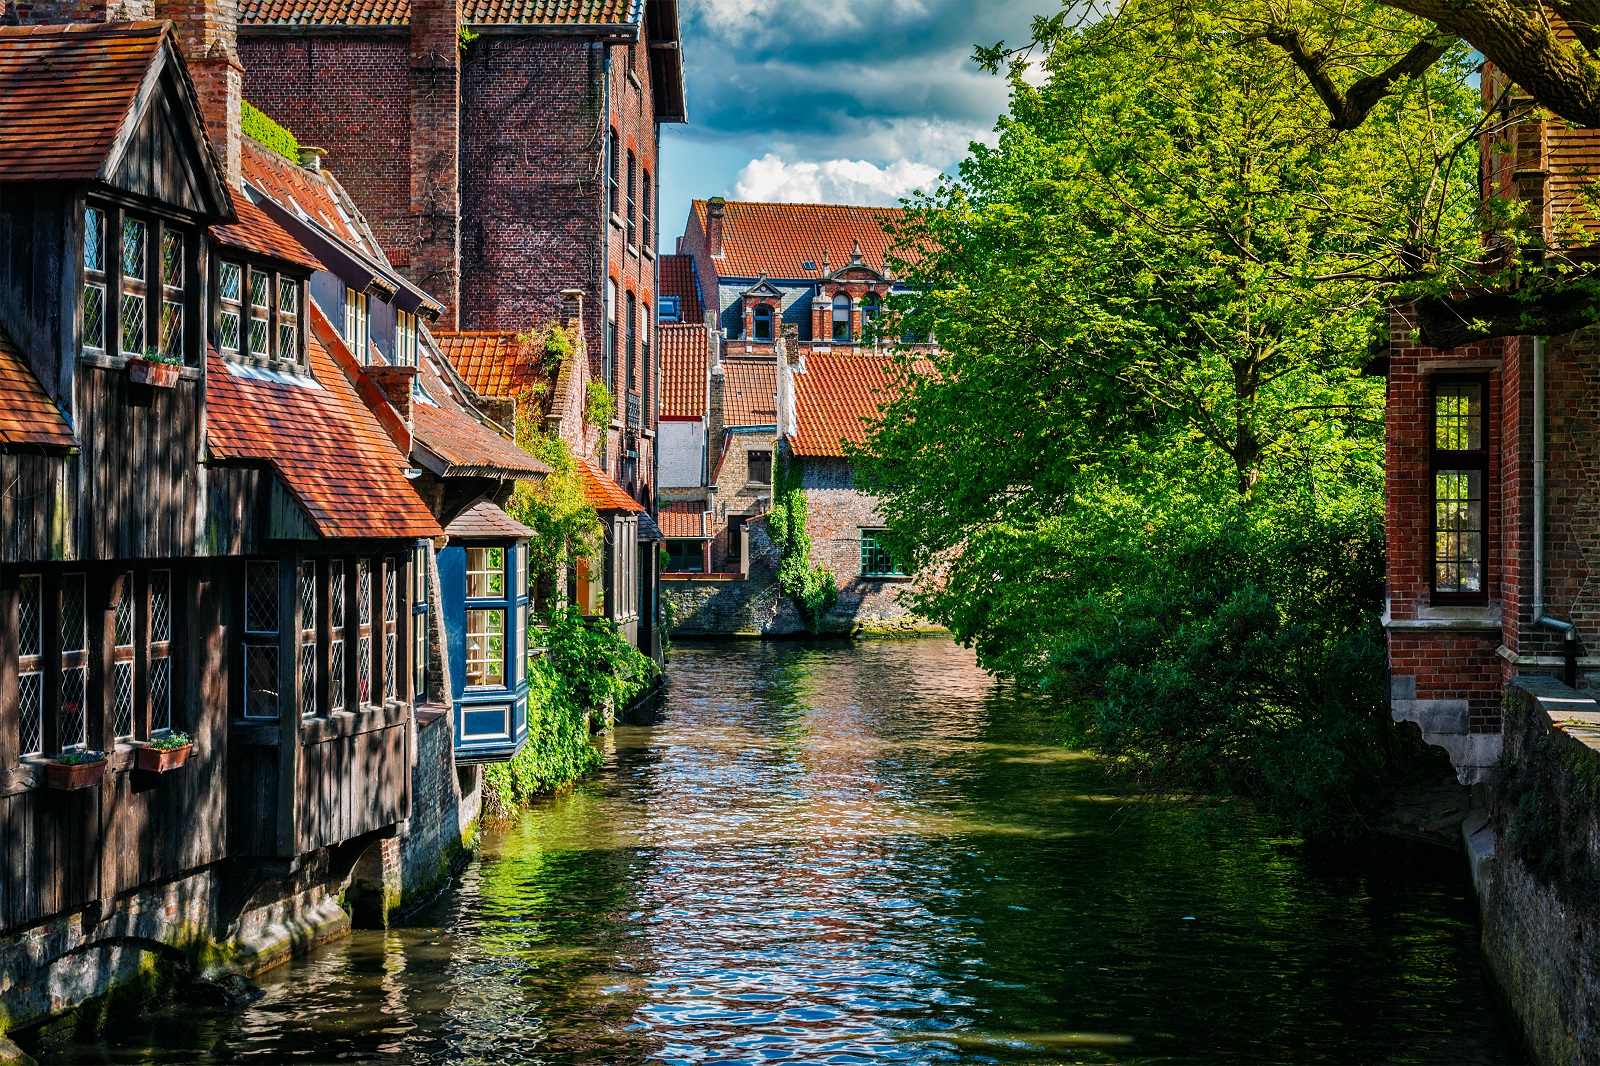 Europe travel background - canal and medieval houses. Bruges (Brugge), Belgium